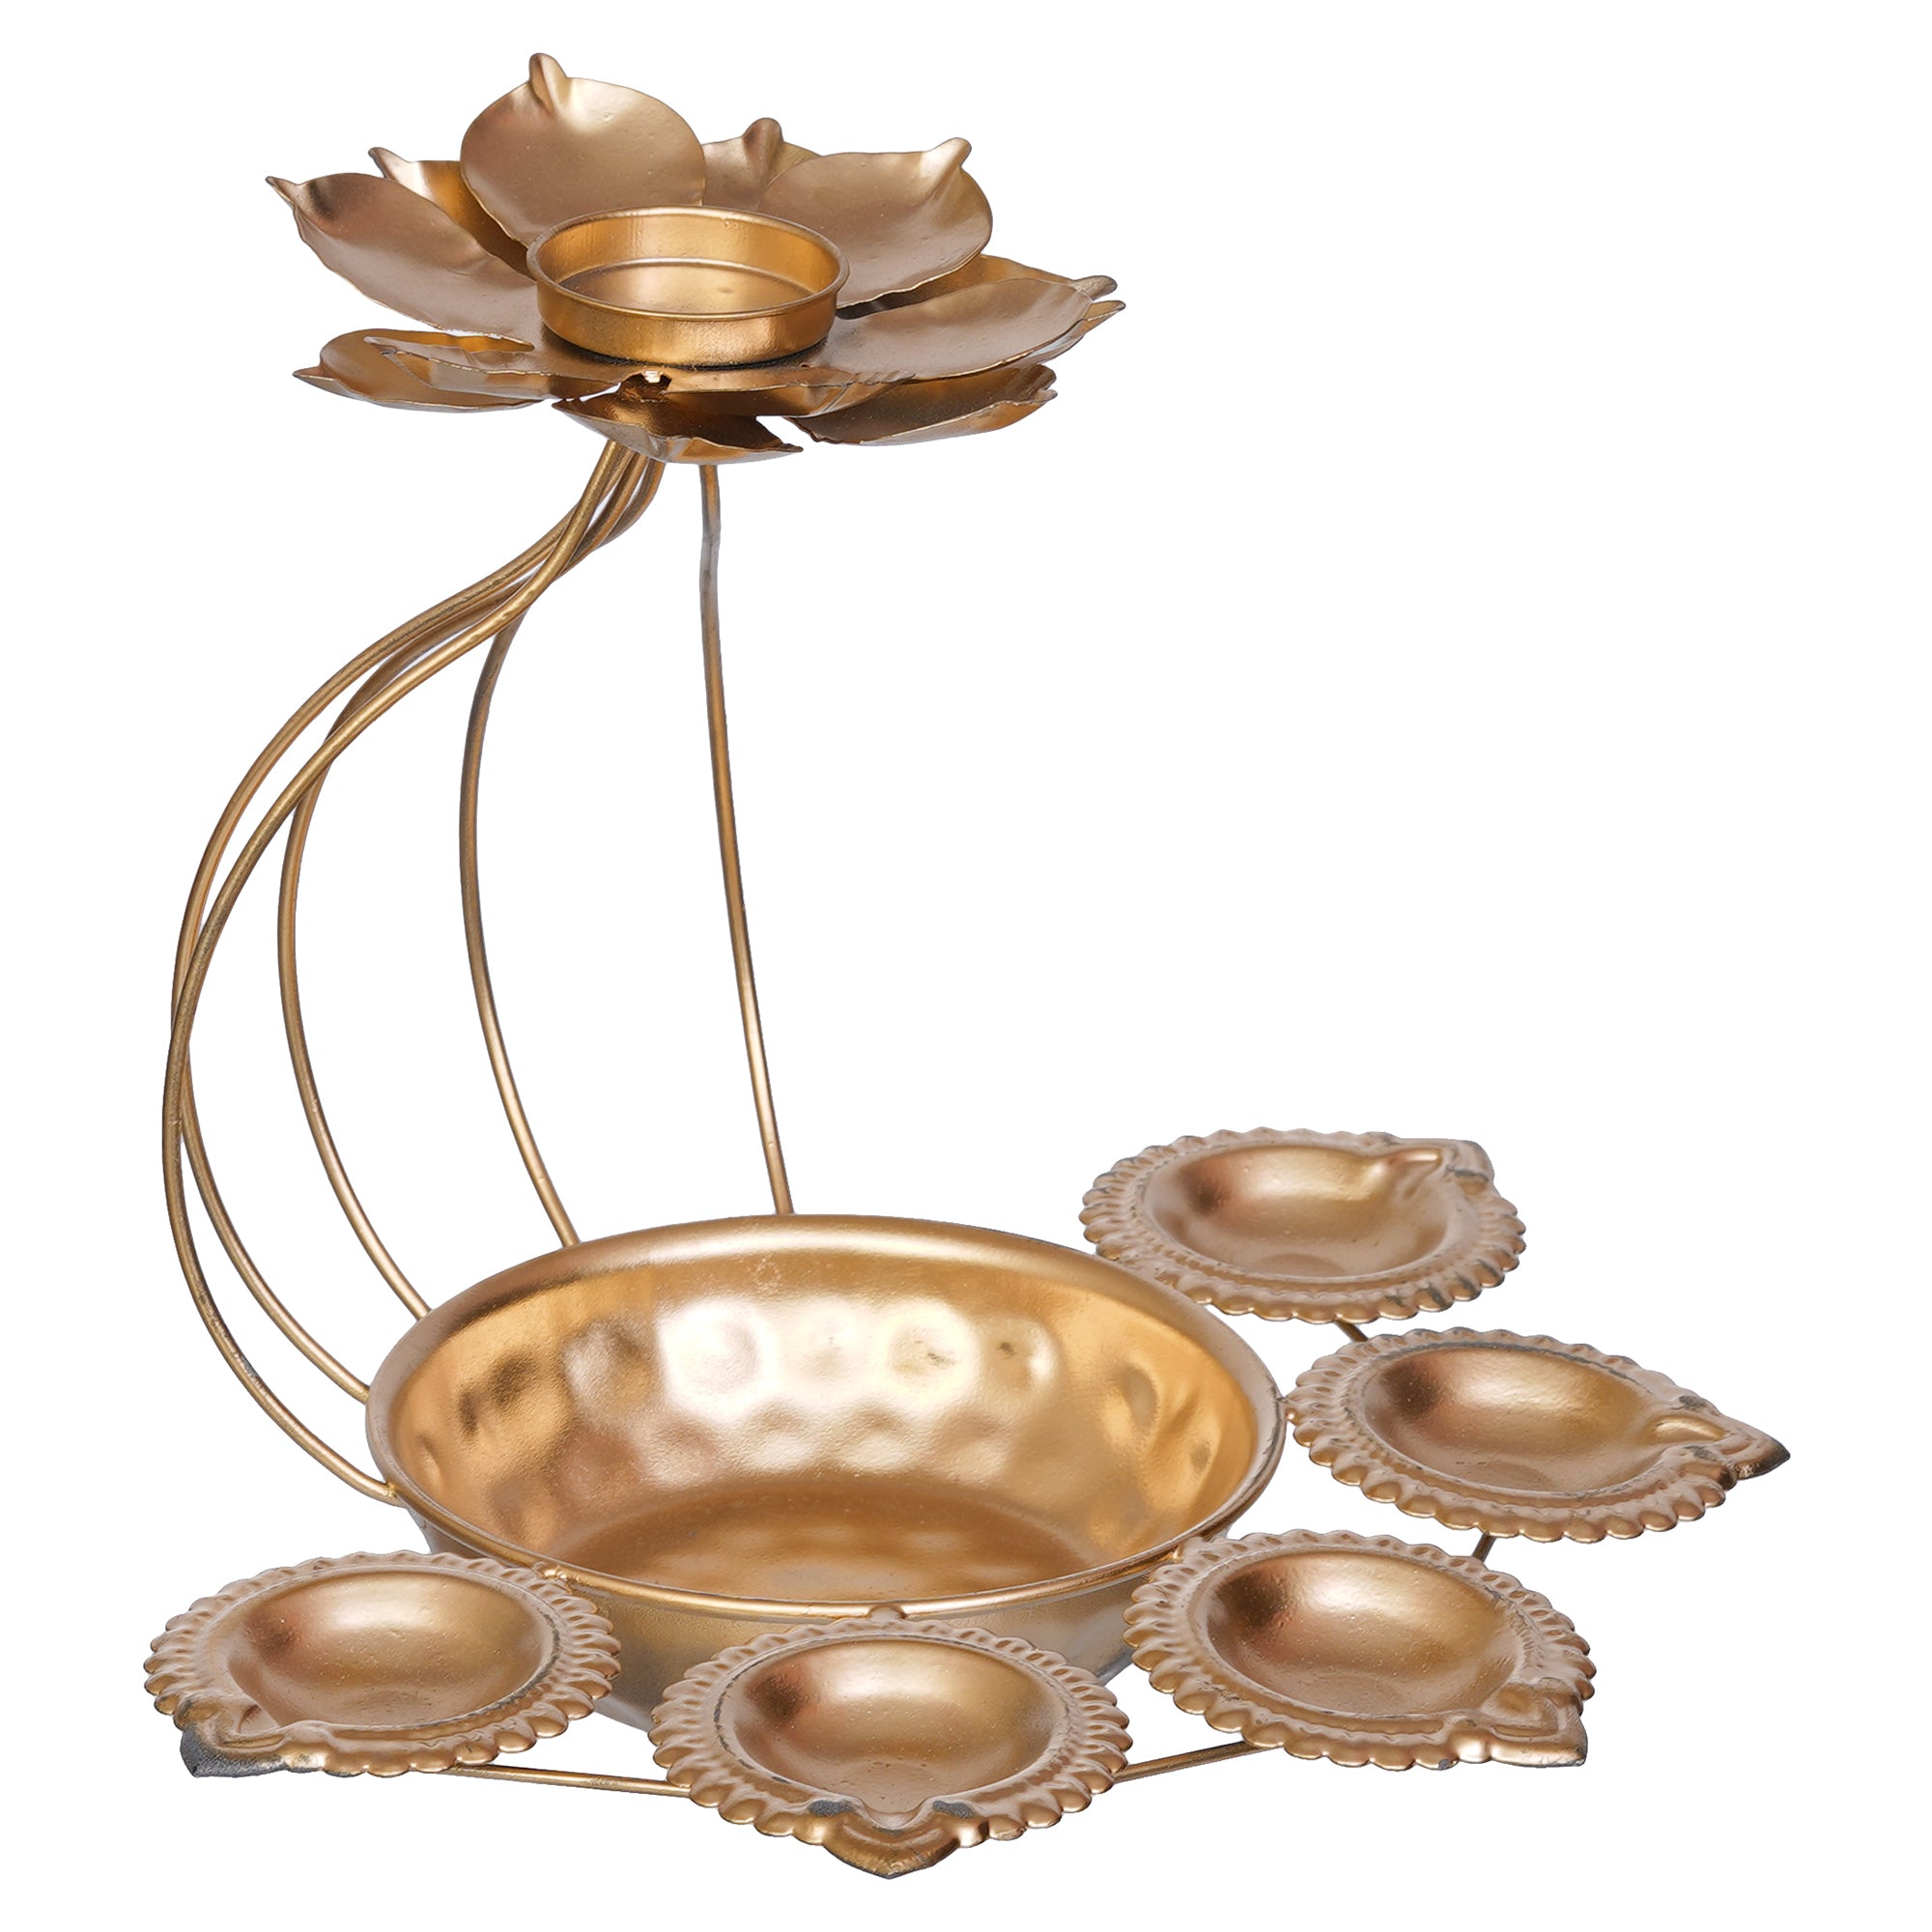 Golden Metal Handcrafted Lotus Shaped Decorative Urli with Tea Light Candle Holder 2